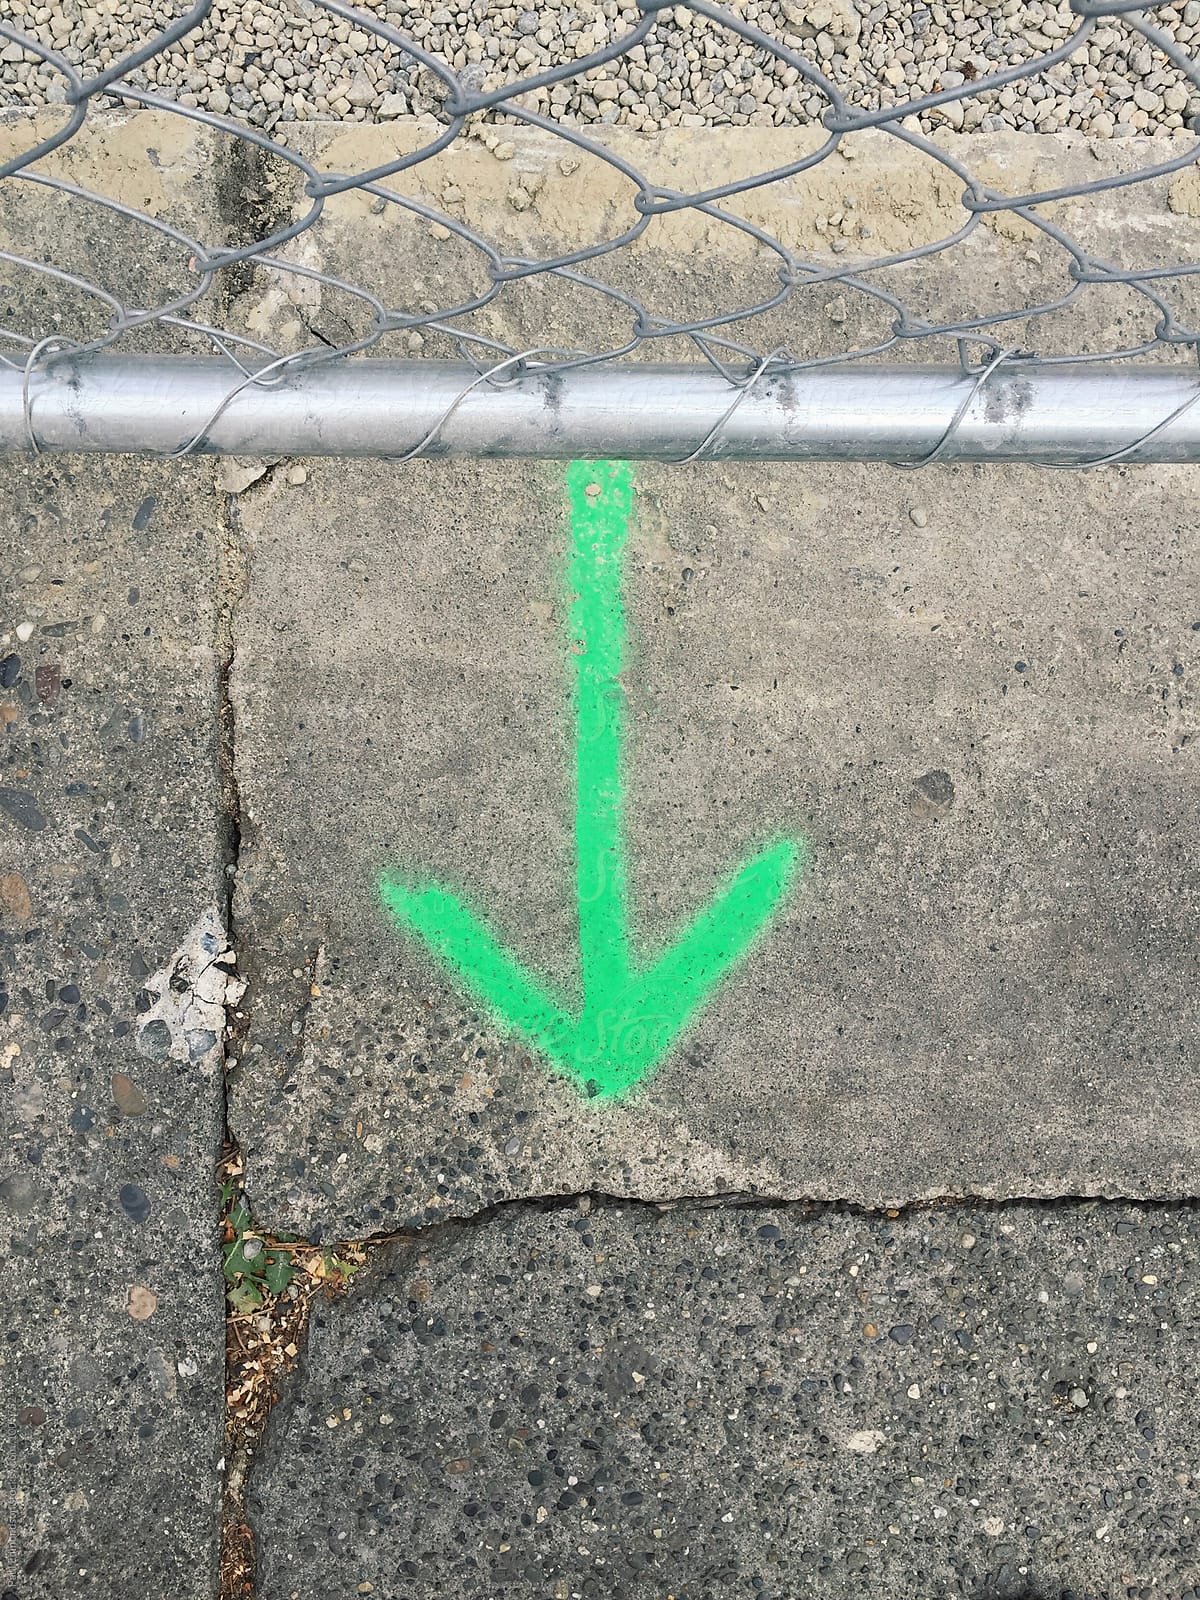 Green arrow painted on sidewalk, chain-link fence in foreground